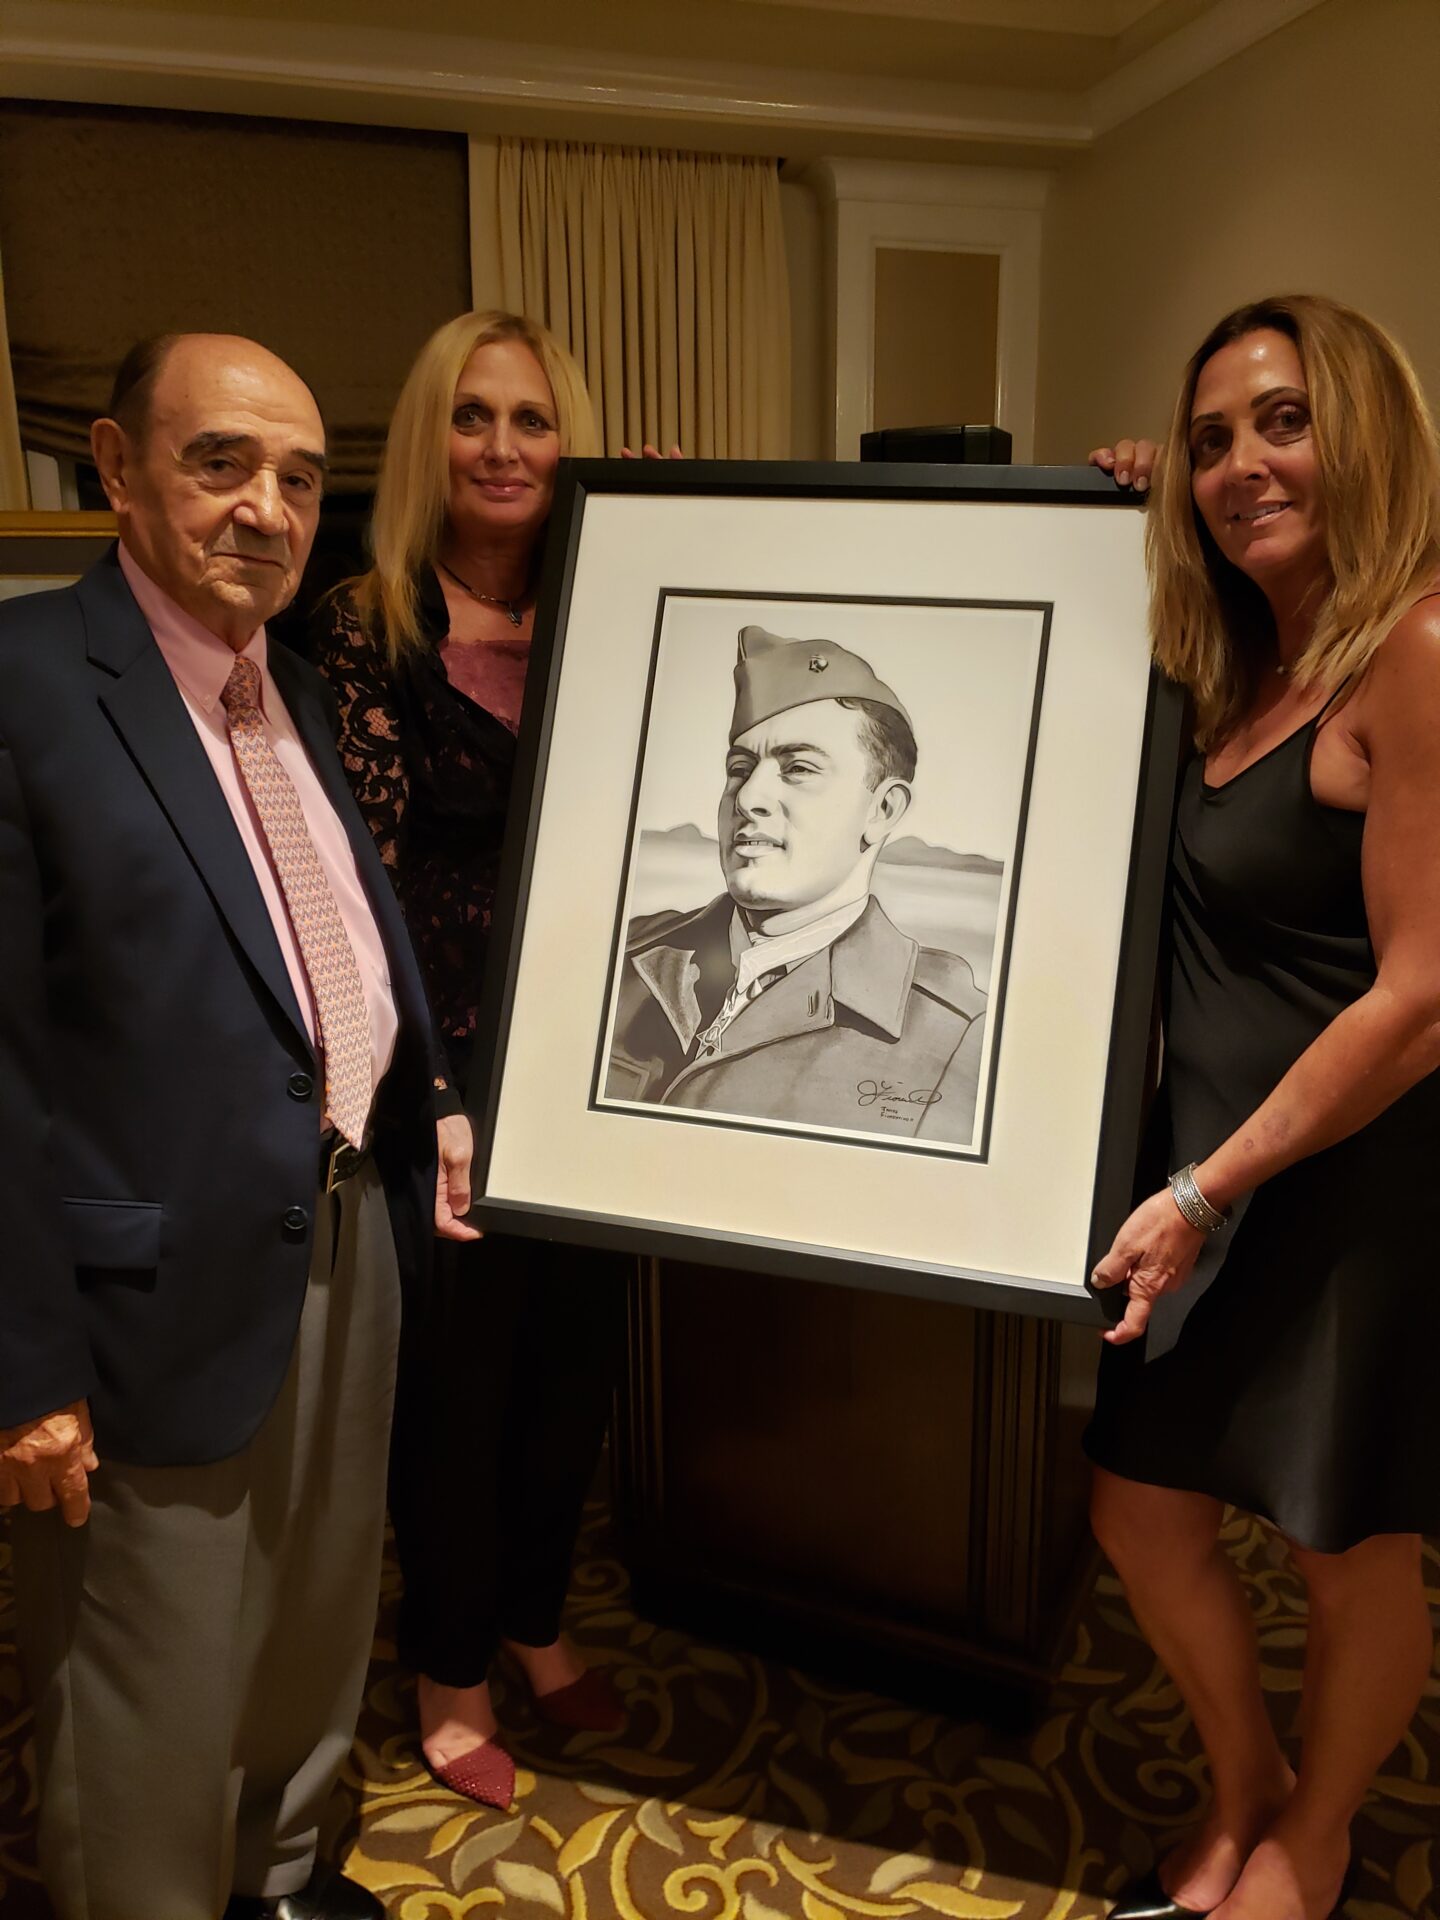 From left Donald Basilone, brother of John Basilone, Diane Hawkins, and Kim Van Note, nieces of John Basilone, hold a portrait of Sgt. John Basilone painted by Artist James Fiorentino.